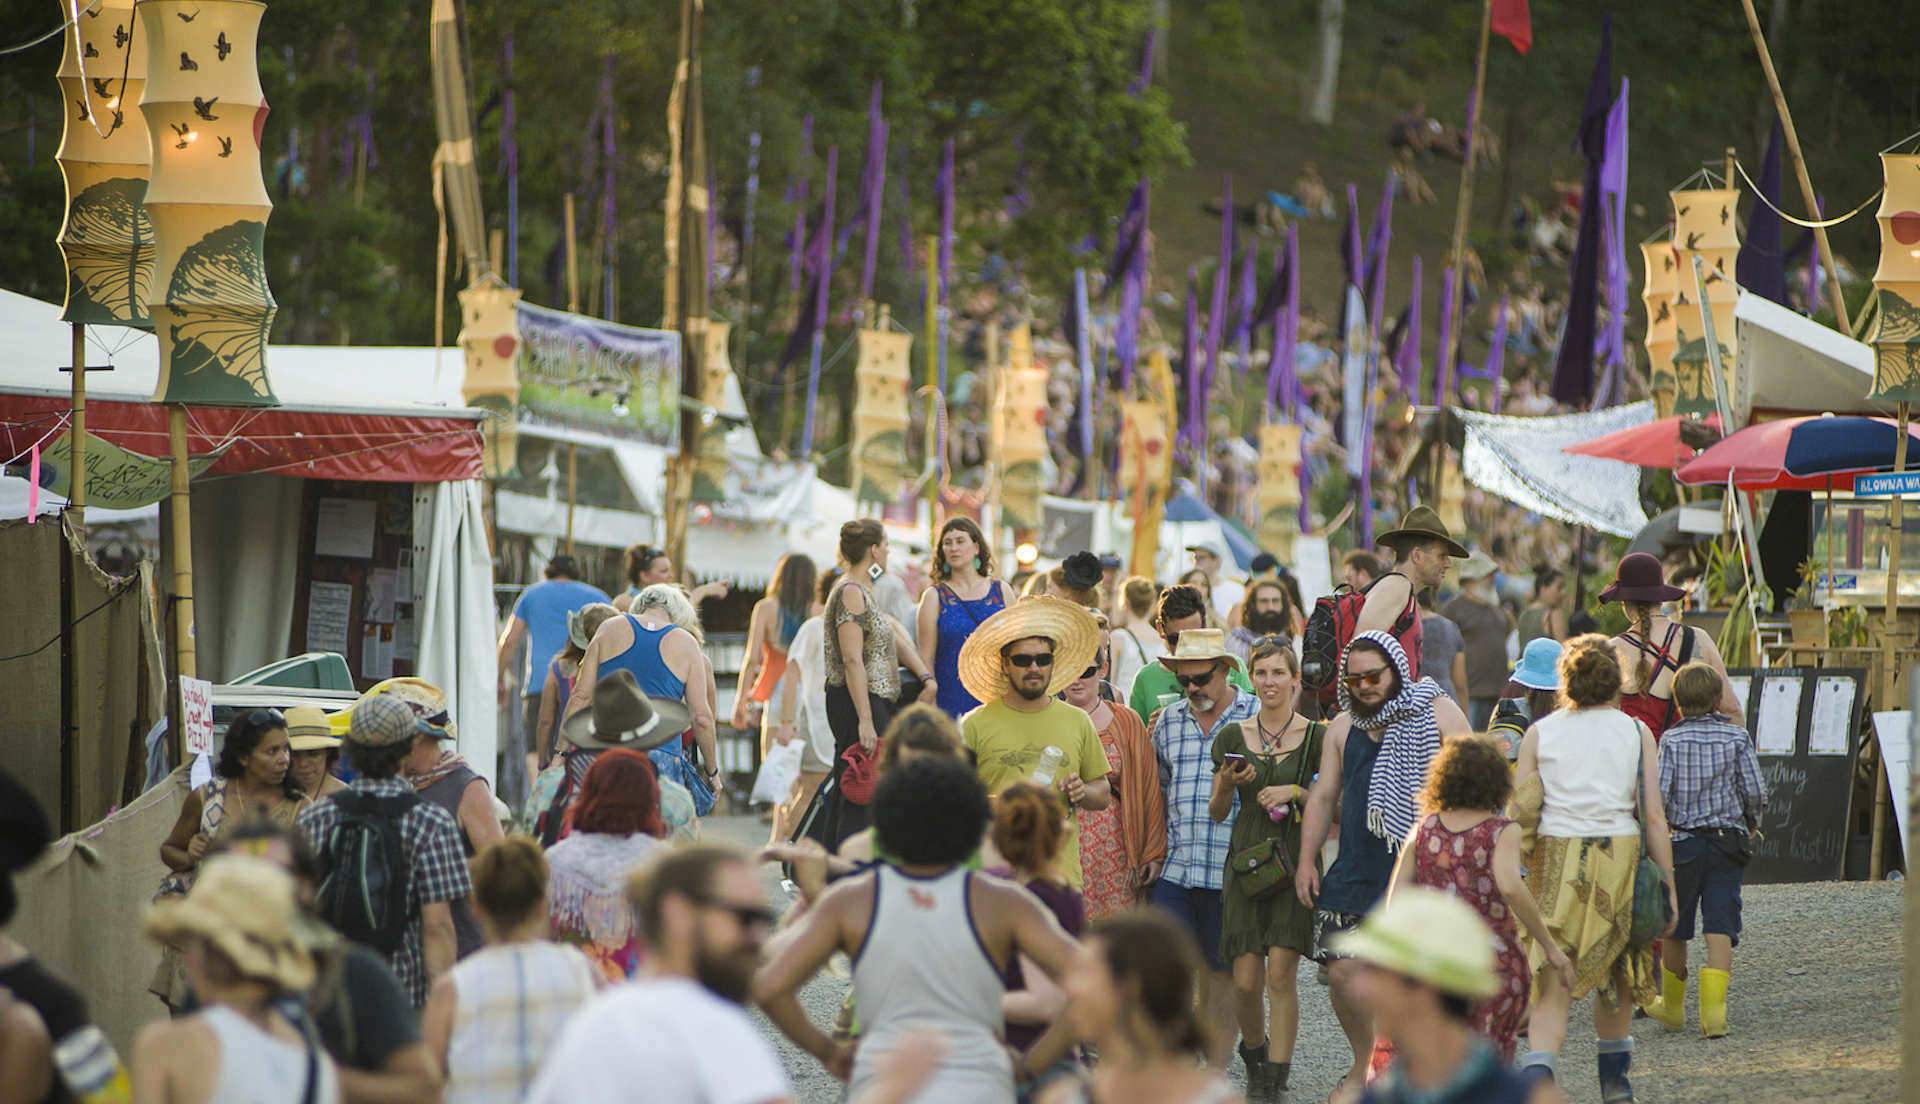 Sydney's Best Out-of-Town Events That You Can Plan a Whole Weekend Around This Summer